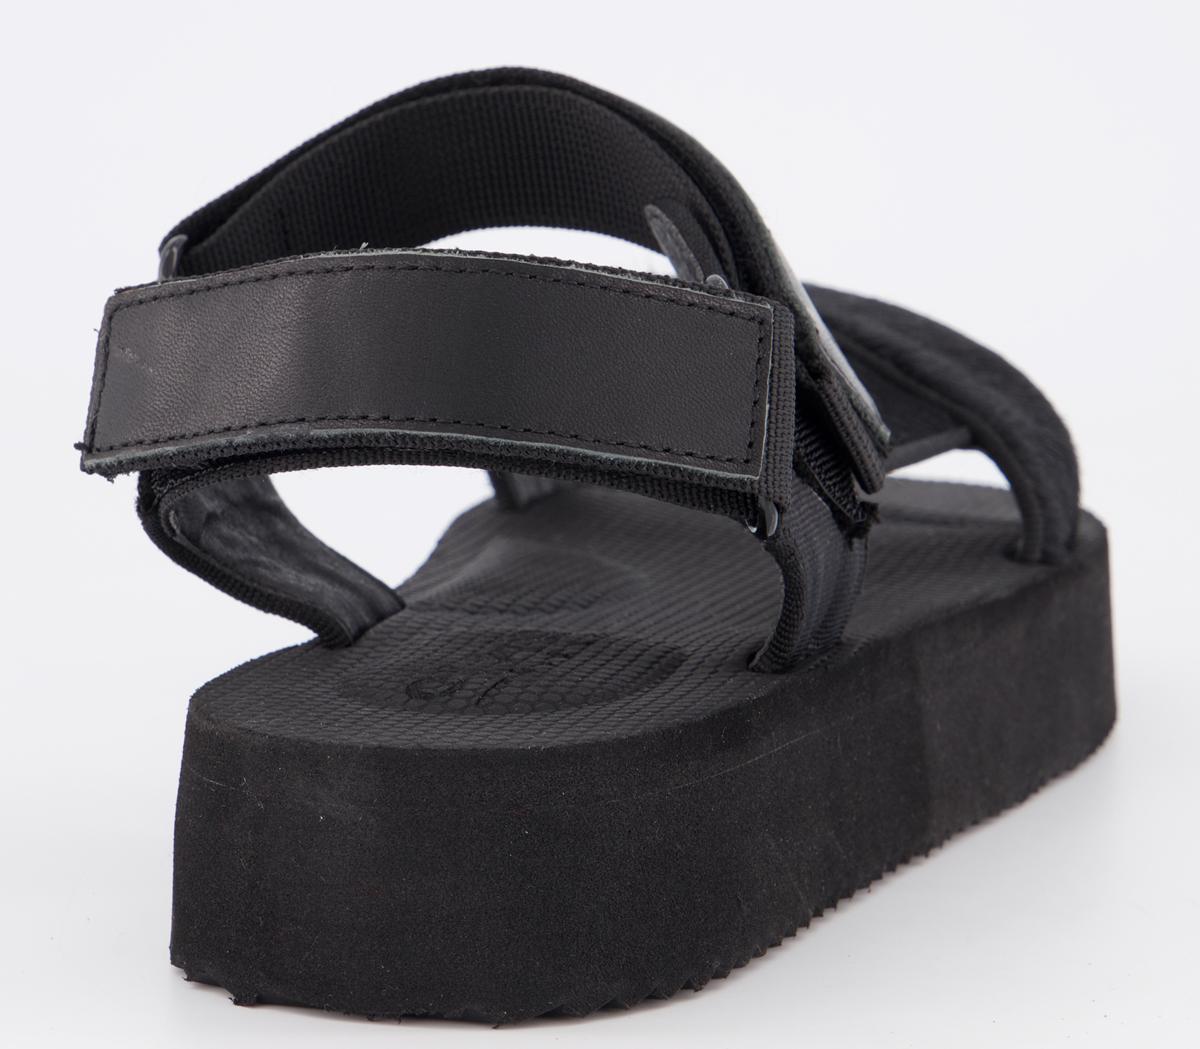 Office Springy Sporty Sandals Black Leather - Sandals